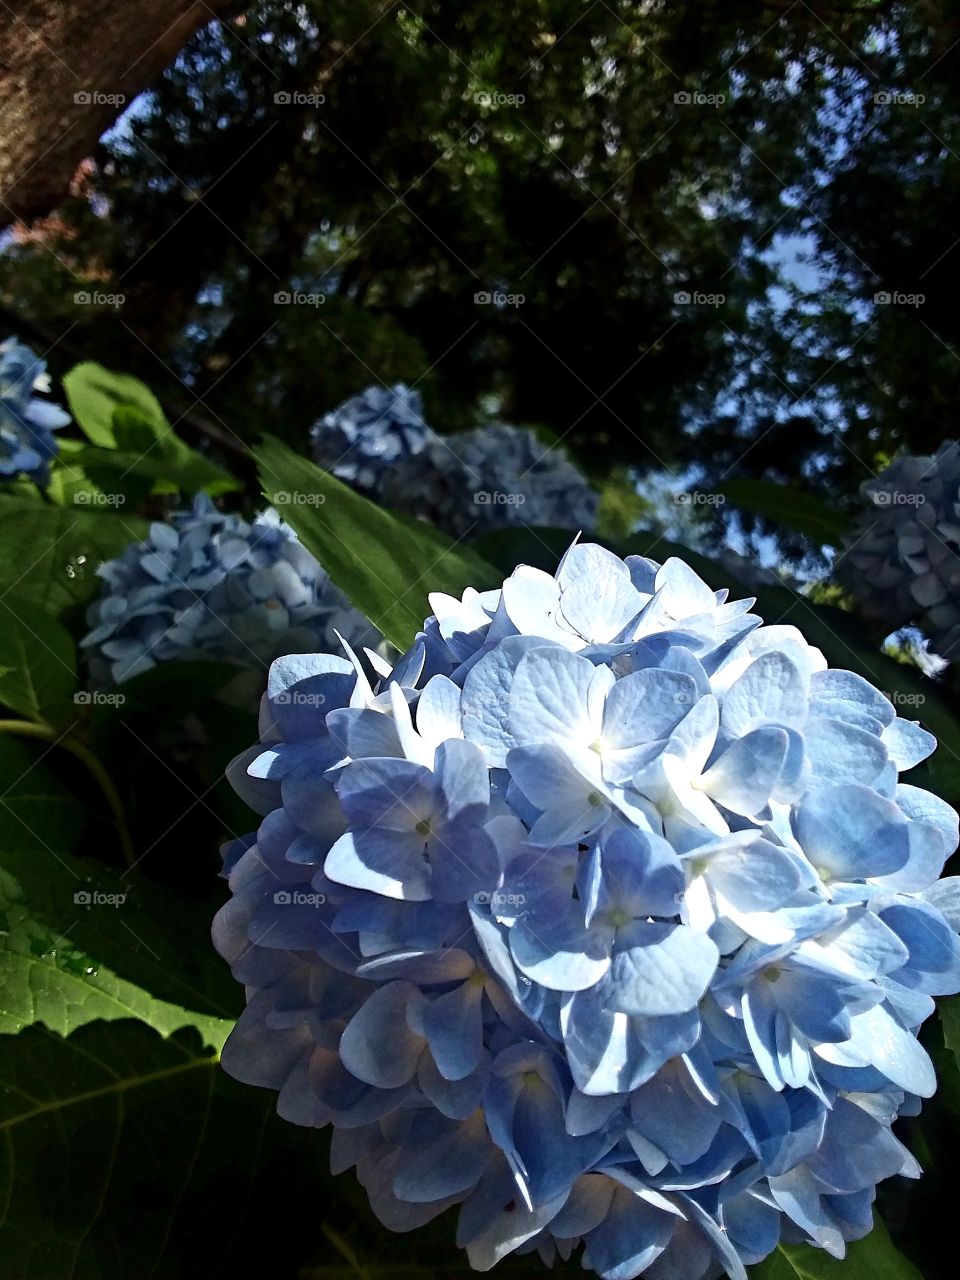 late afternoon sunshine and shadows cast on the Hydrangea